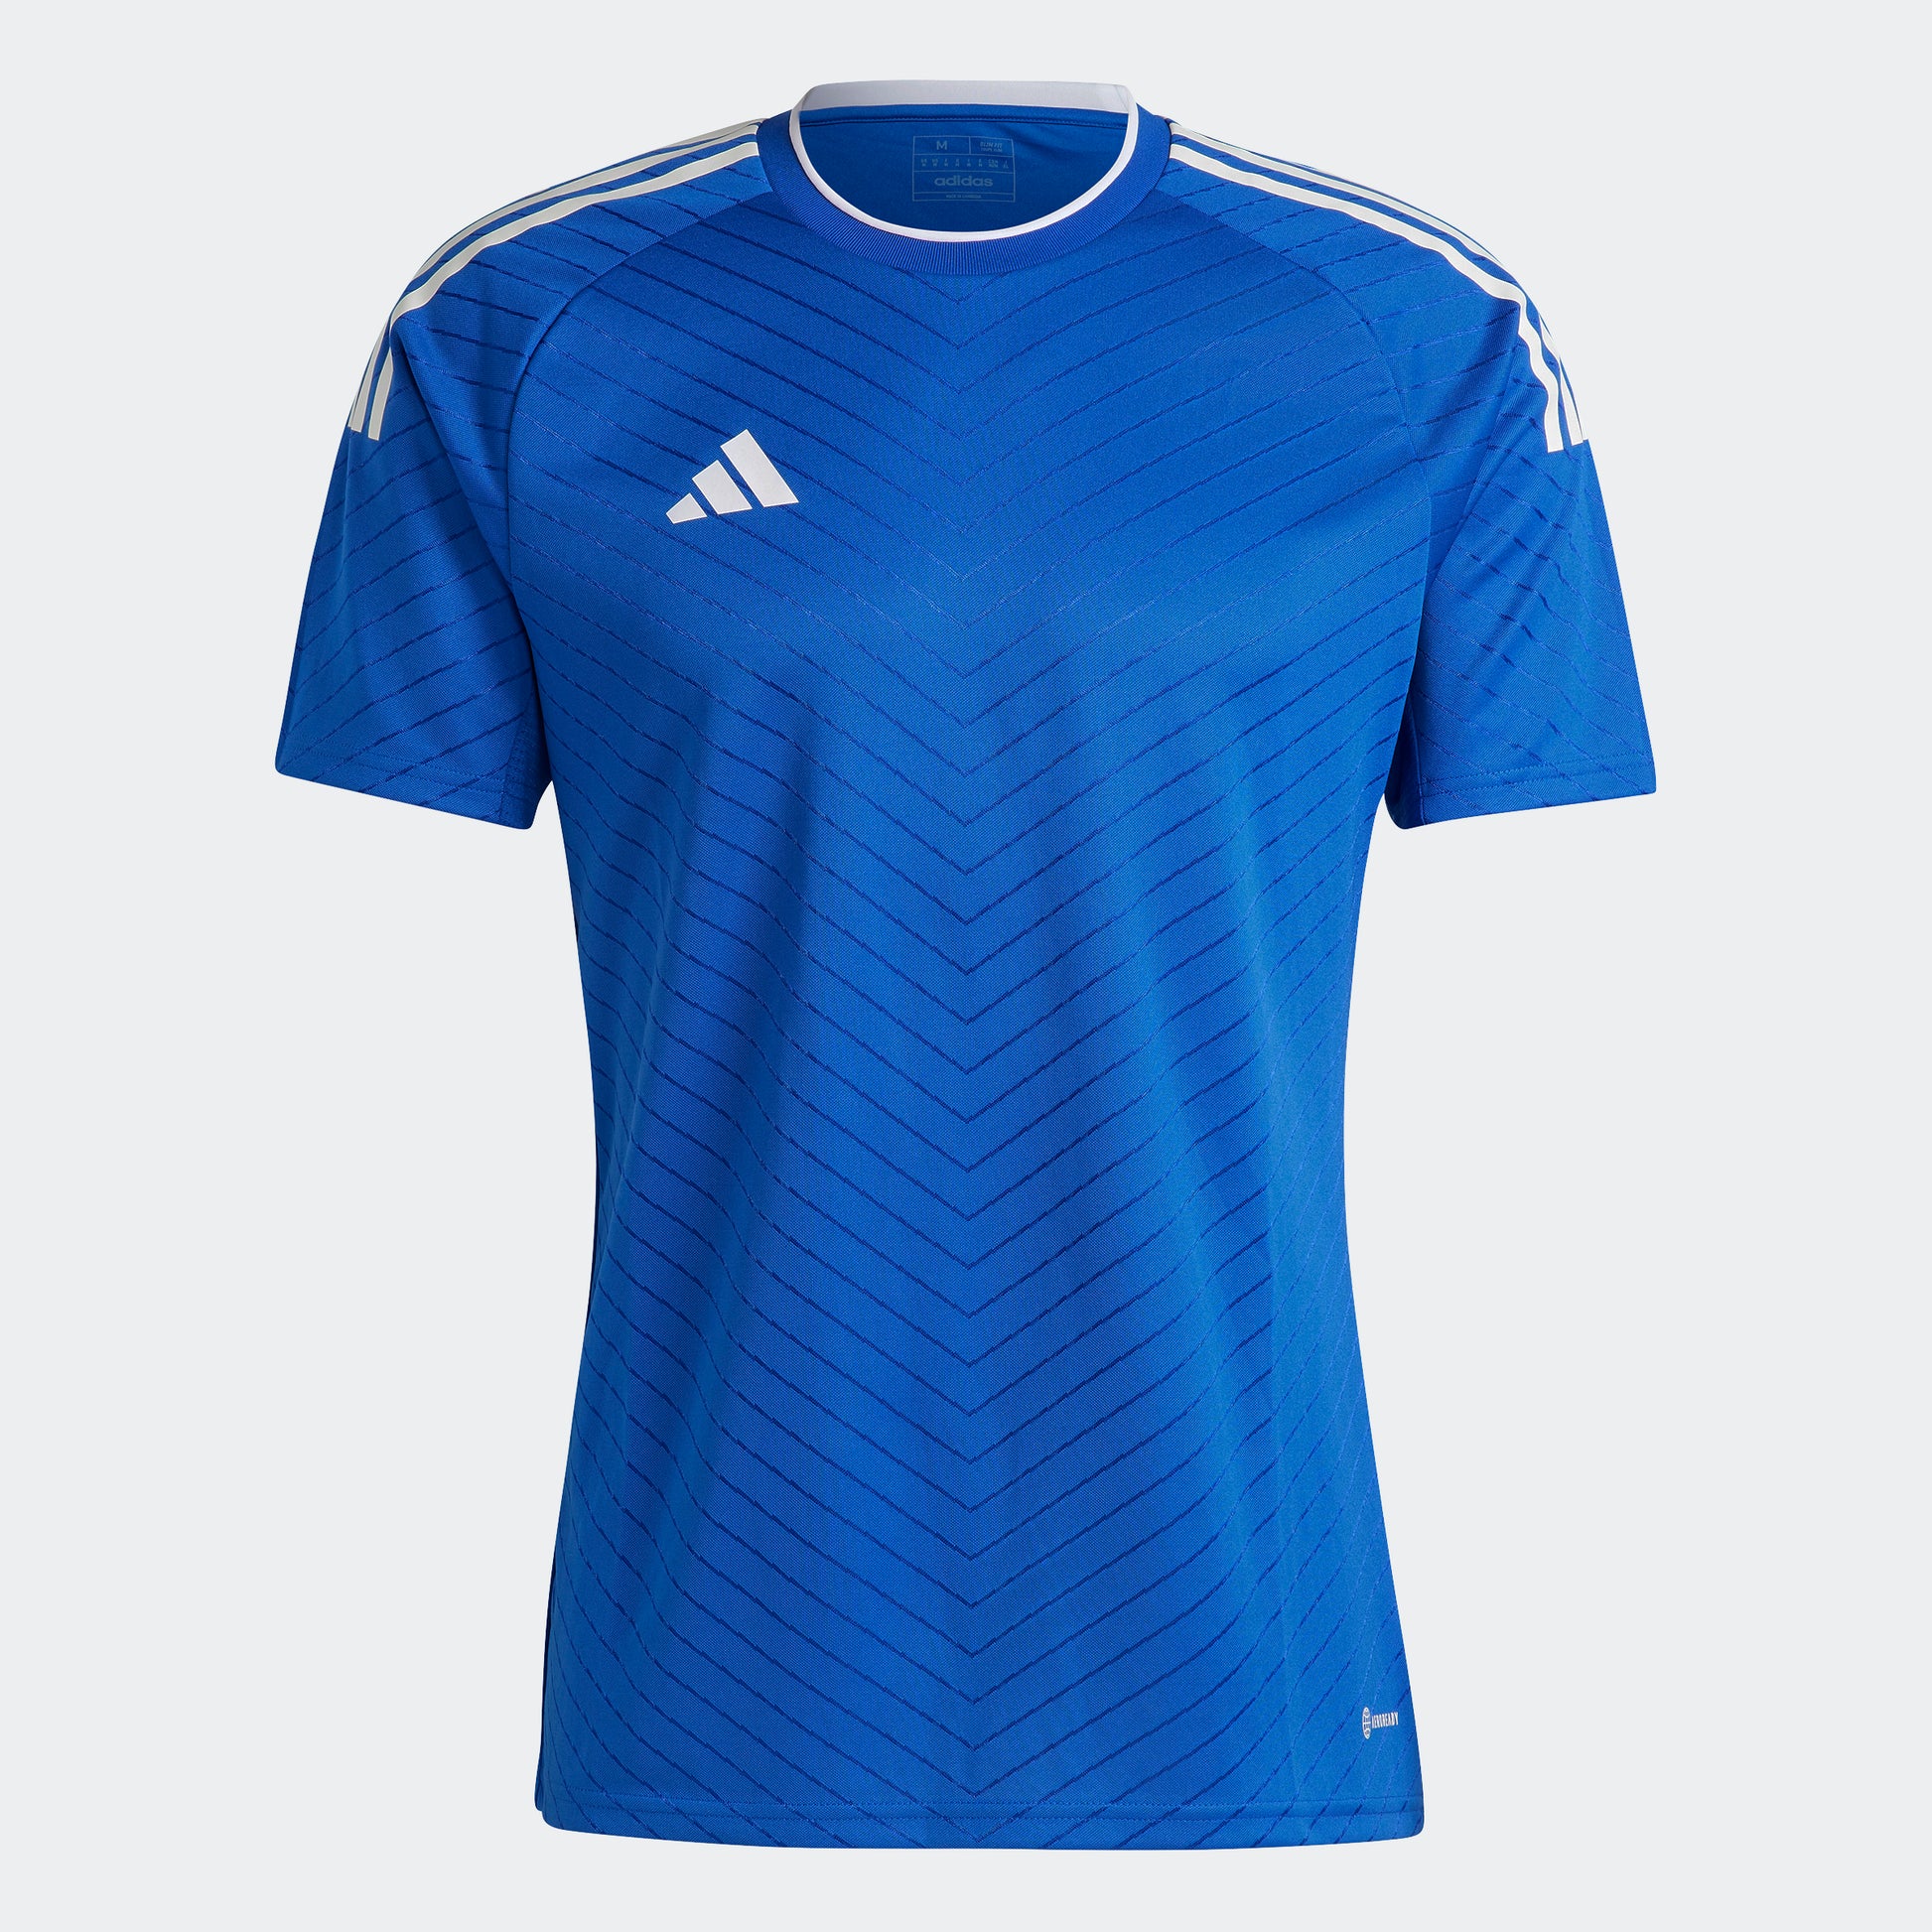 adidas Campeon 23 Jersey Team Royal Blue (Front)